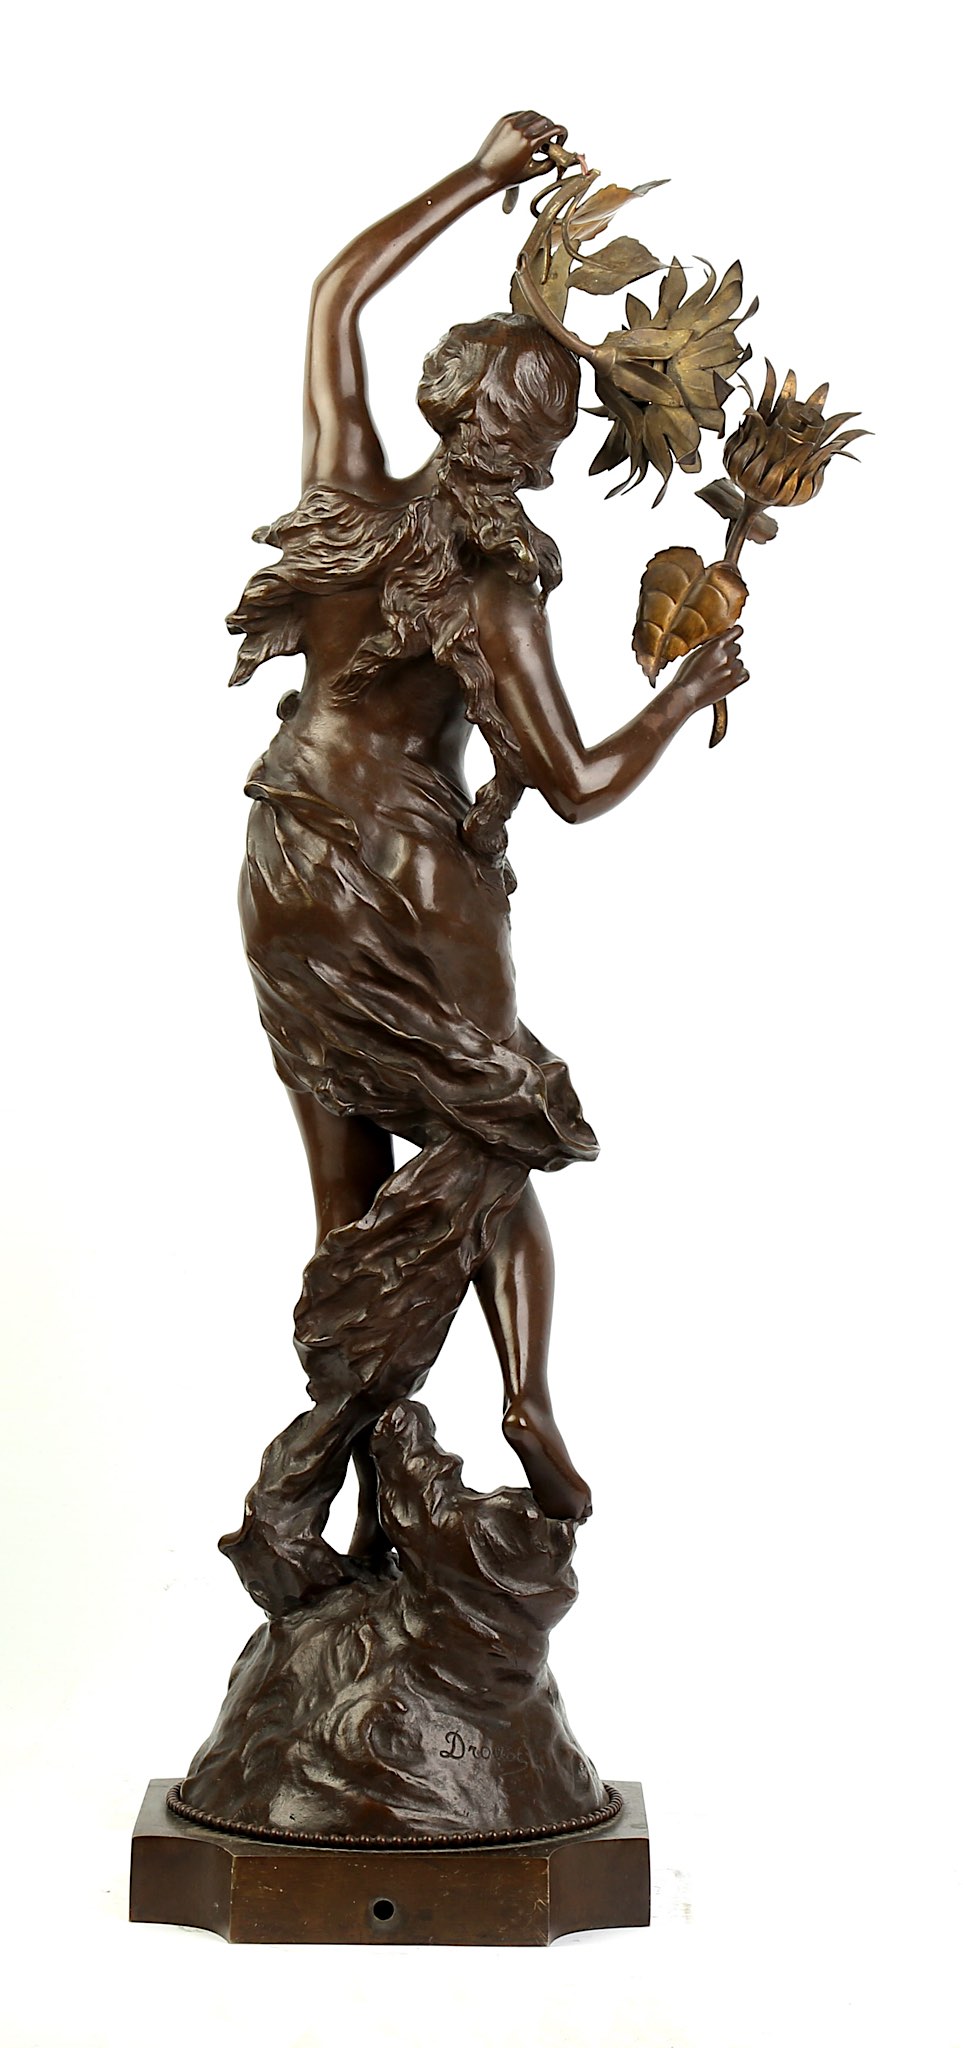 EDOUARD DROUOT (FRENCH, 1859-1945): A BRONZE FIGURE OF A SEMI-CLAD MAIDEN FITTED AS A LAMP BASE - Image 3 of 11